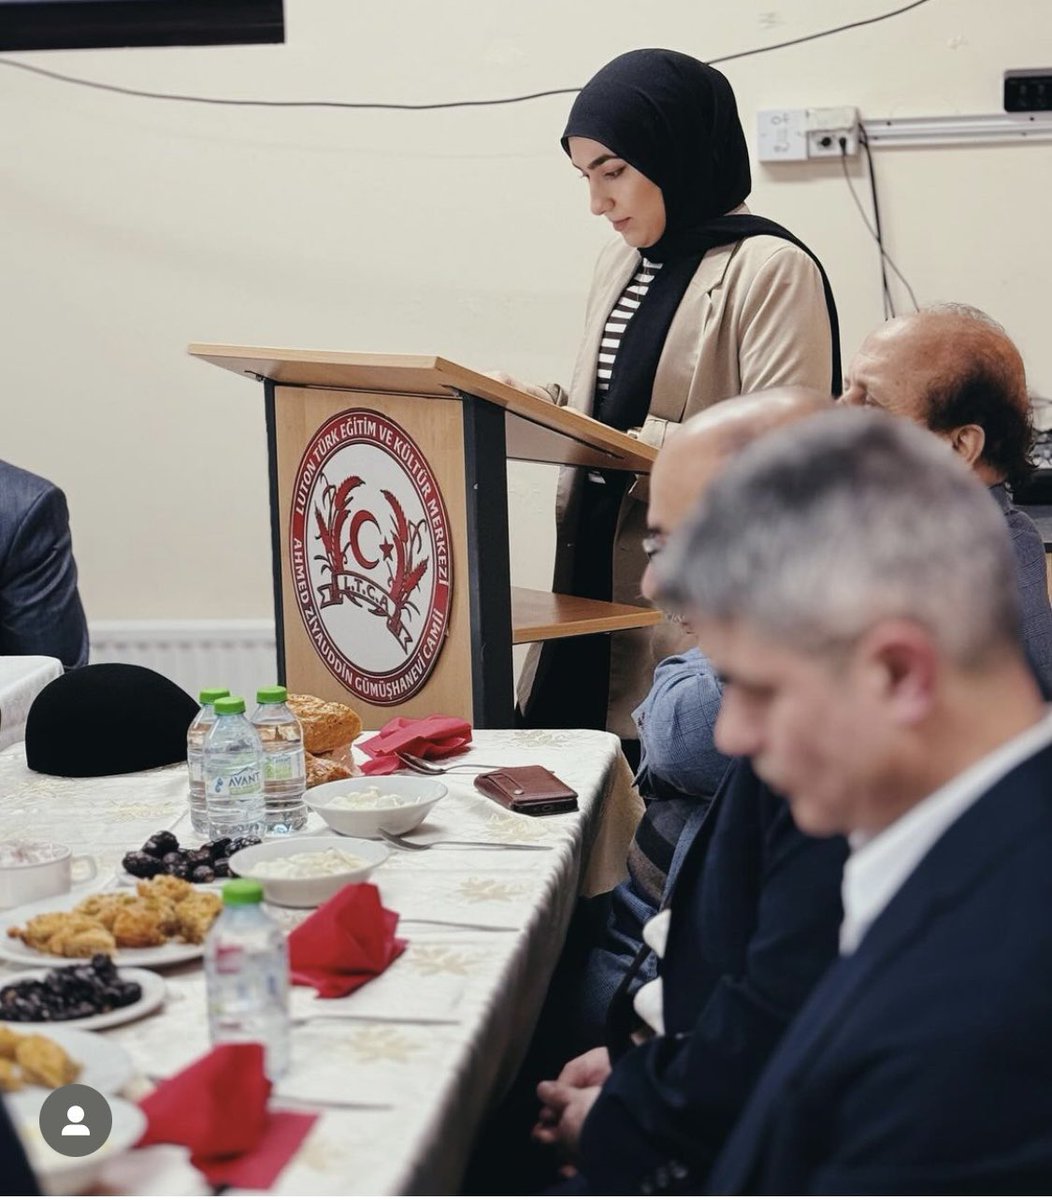 Honoured to join a special evening with the @LutonTurkish community from across our town to share in their Iftar. There were speeches which called for peace and a brighter future - with a heartfelt connection to one another in Luton and across the world. #Luton #ramadan